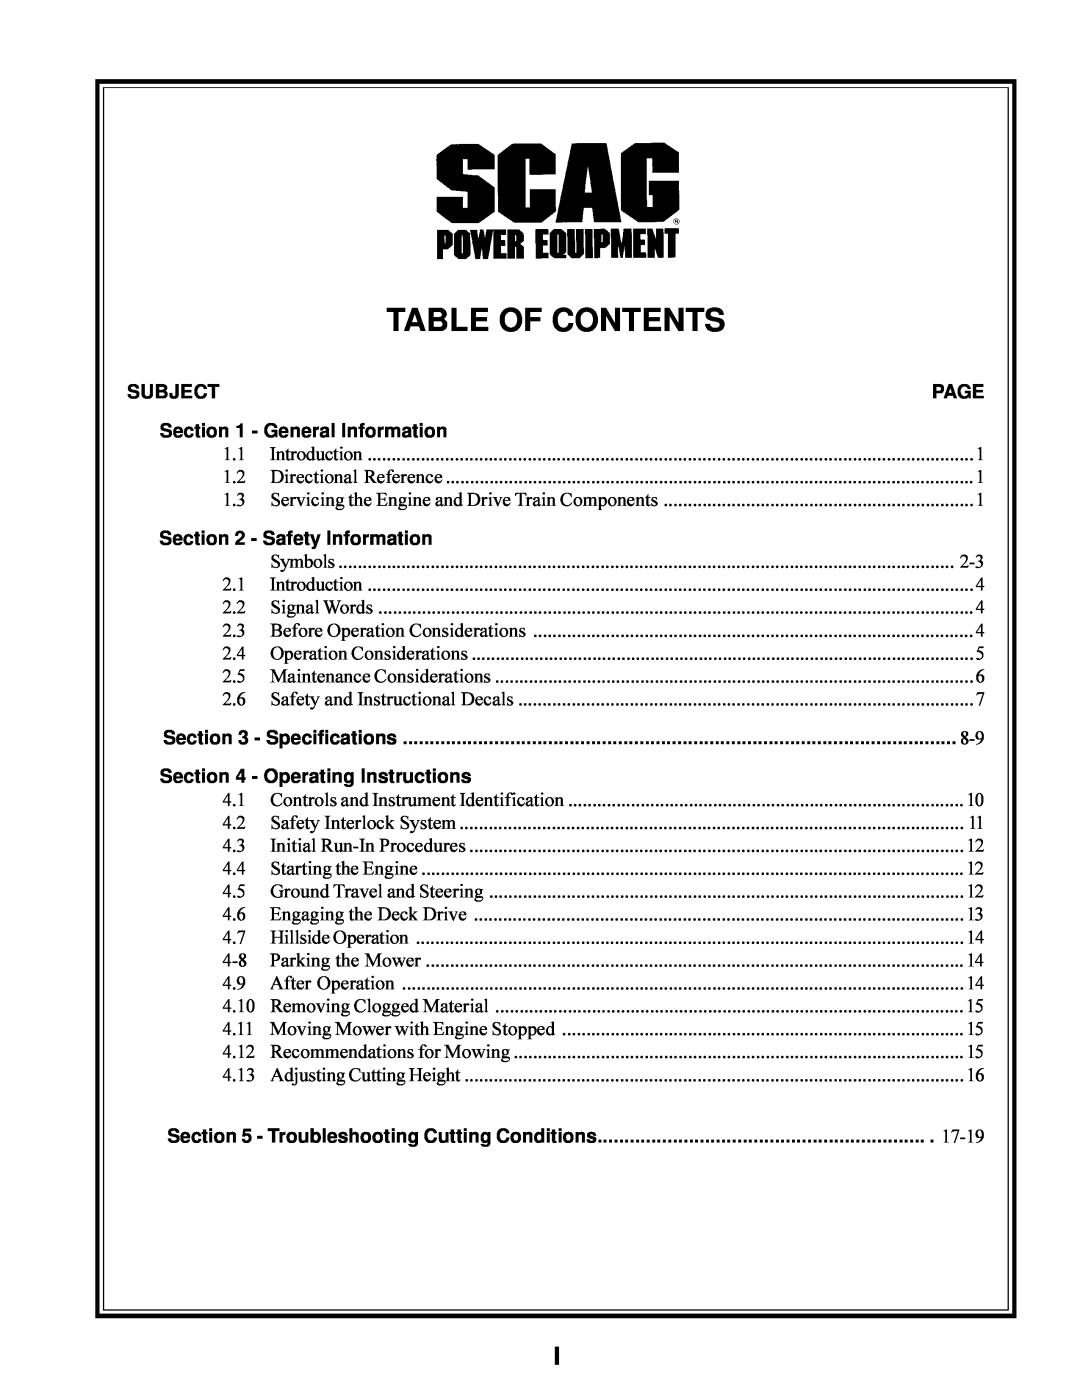 Scag Power Equipment STT-31BSG Table Of Contents, Subject, General Information, Safety Information, Operating Instructions 